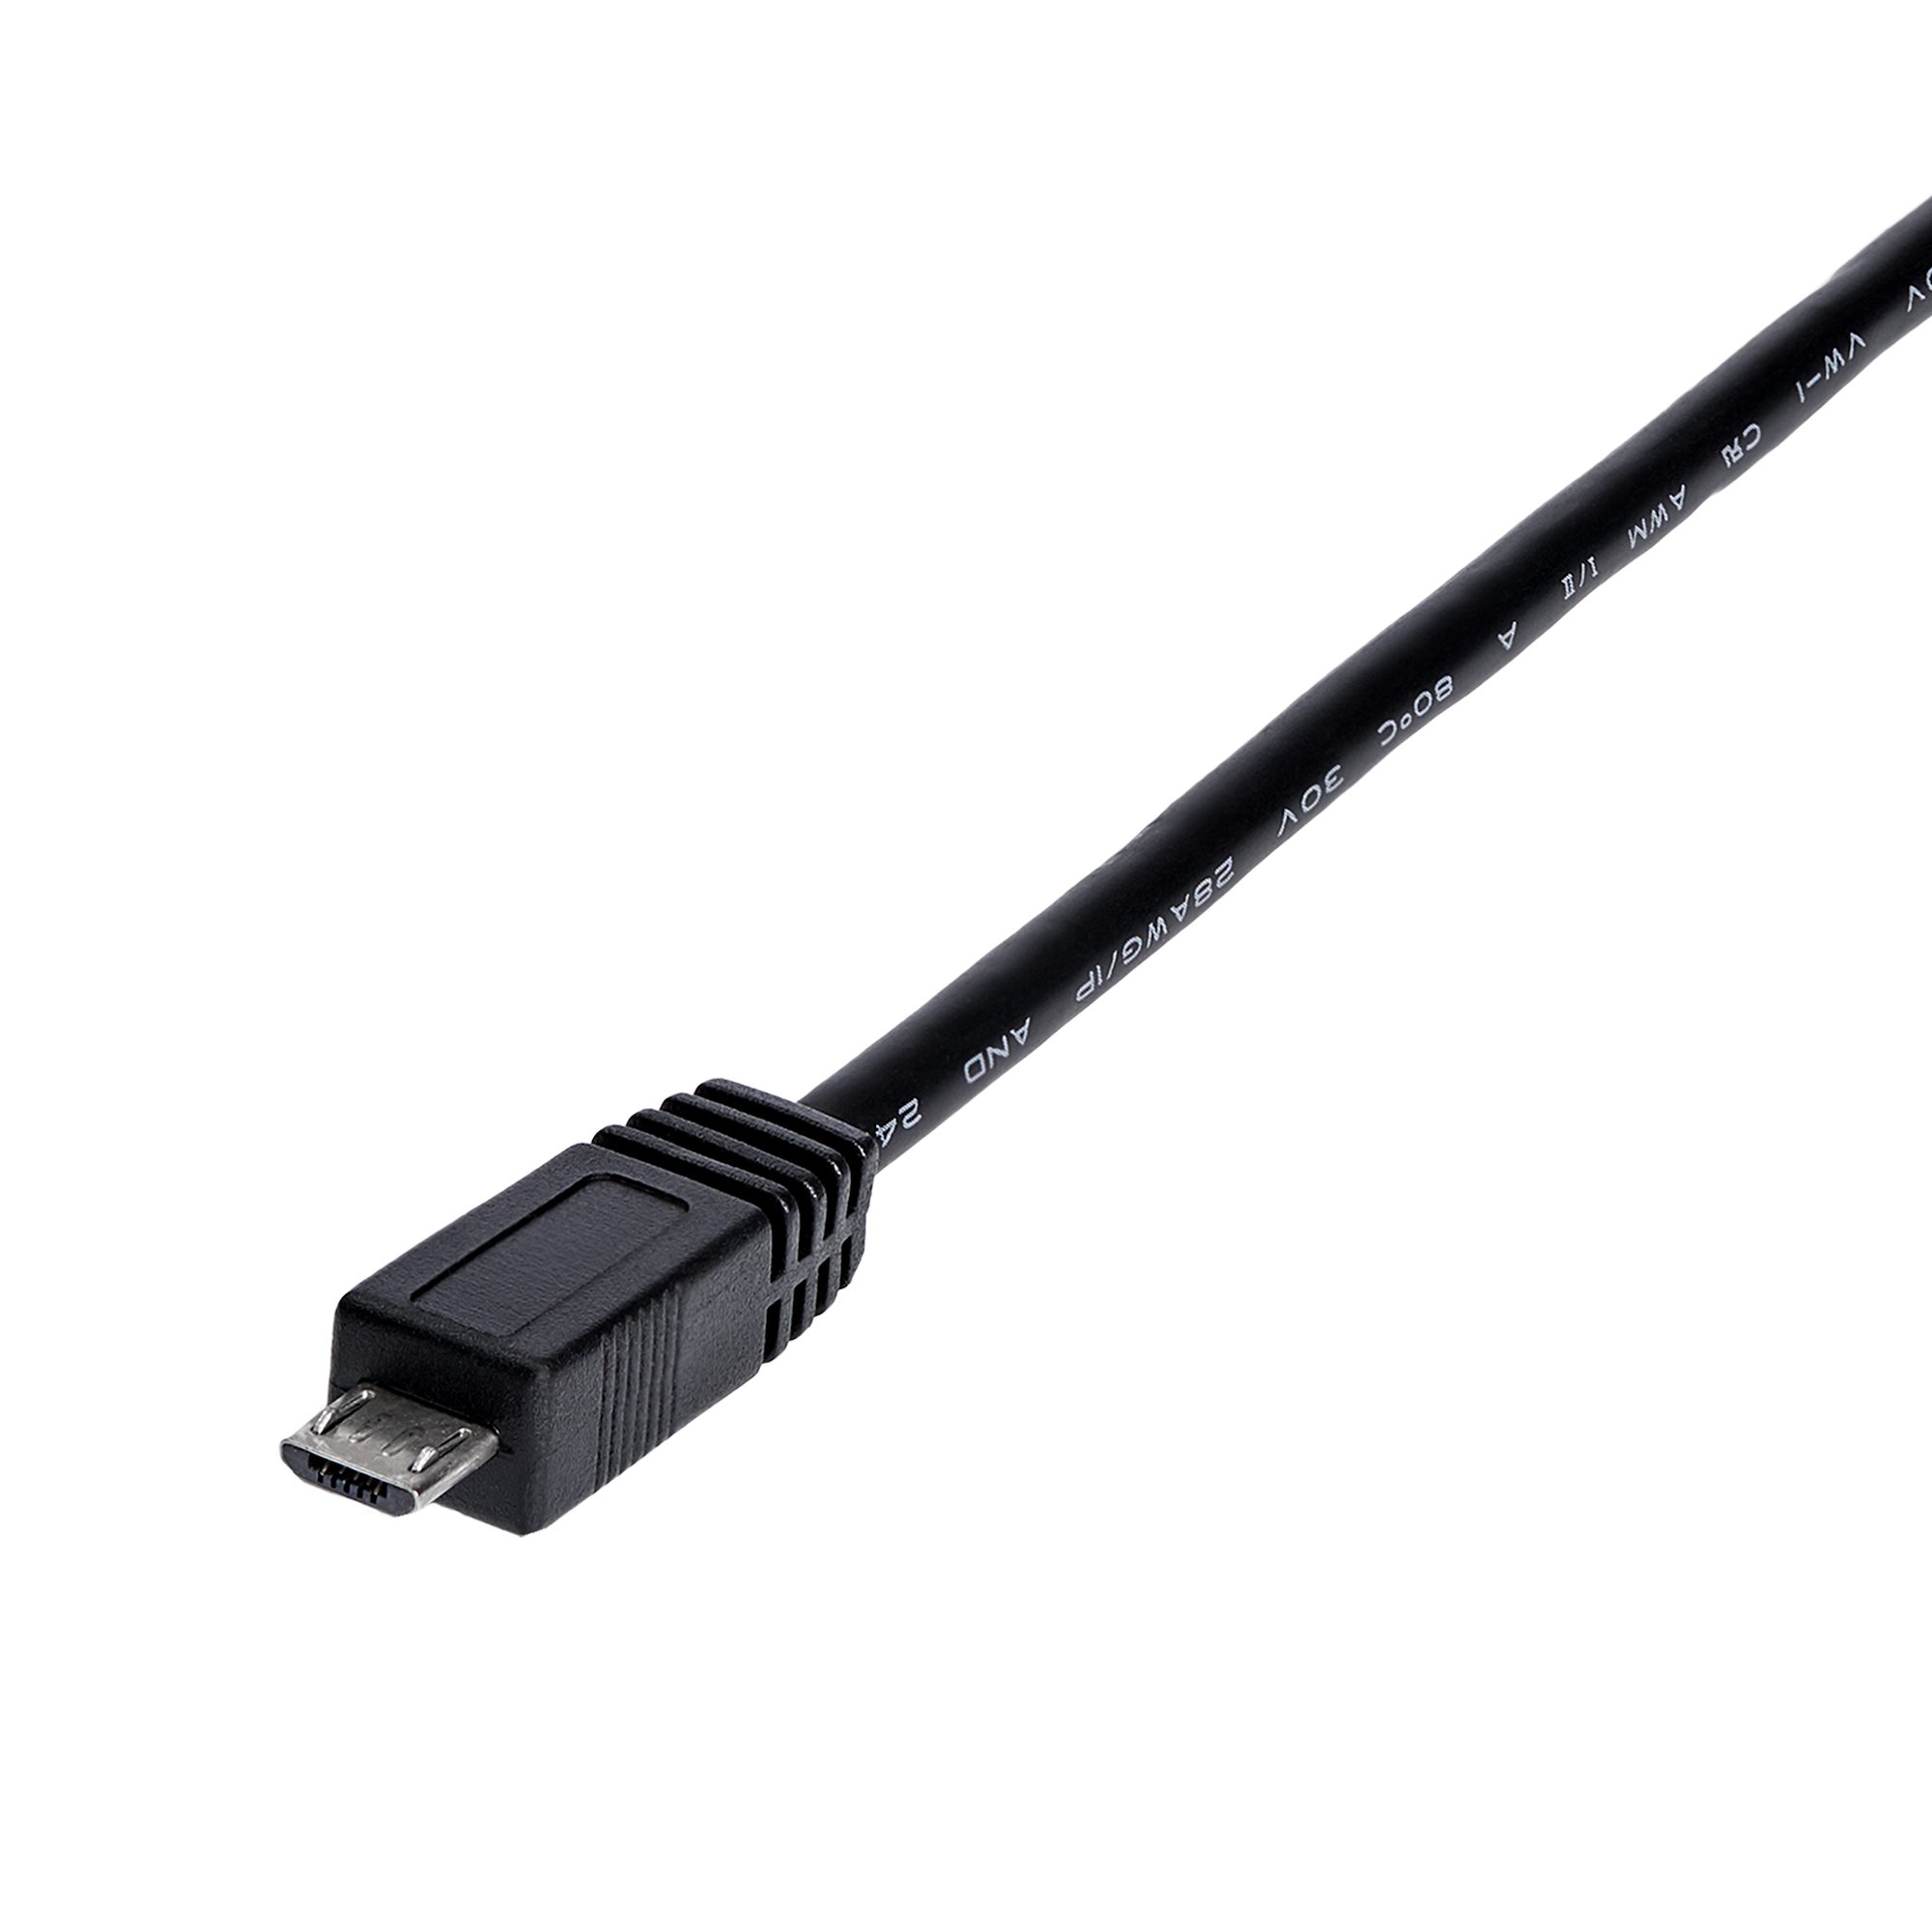 3 ft USB Y Cable for External Hard Drive - Micro USB Cables